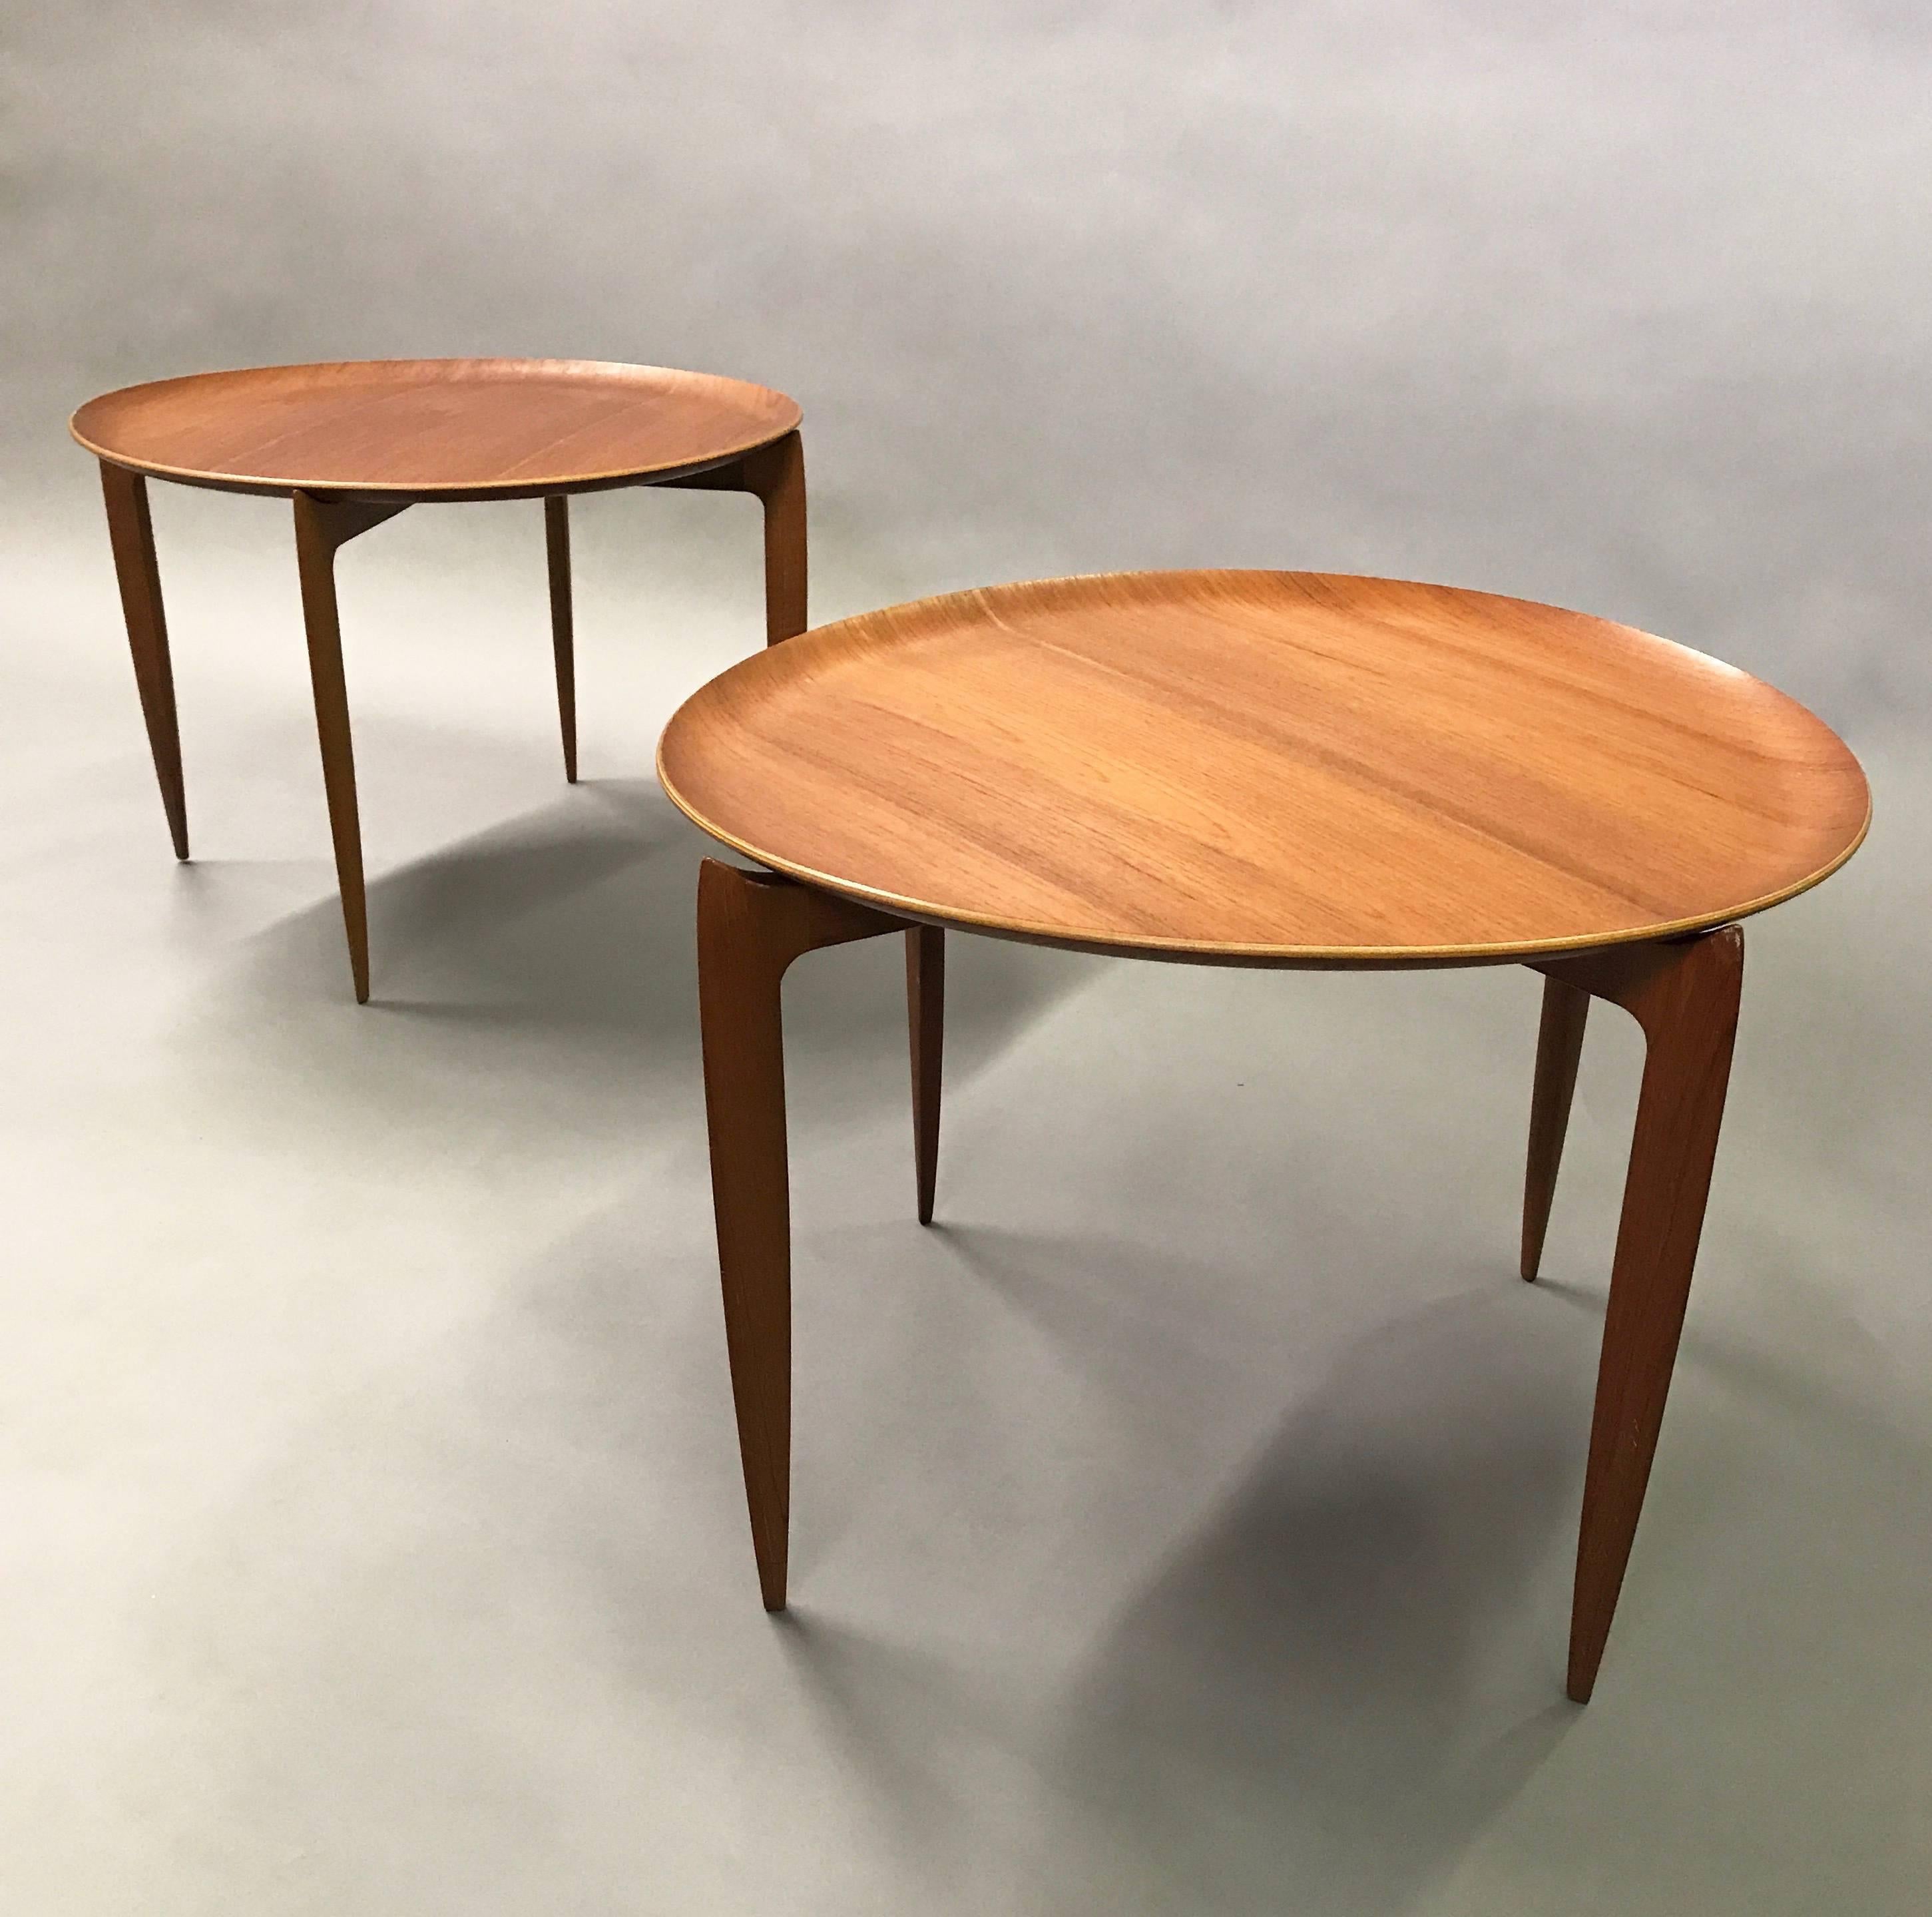 Danish modern, sculpted, teak, side tables designed by H. Engholm and Sven Aage Willumsen for Fritz Hansen with removable tray tops and folding bases.